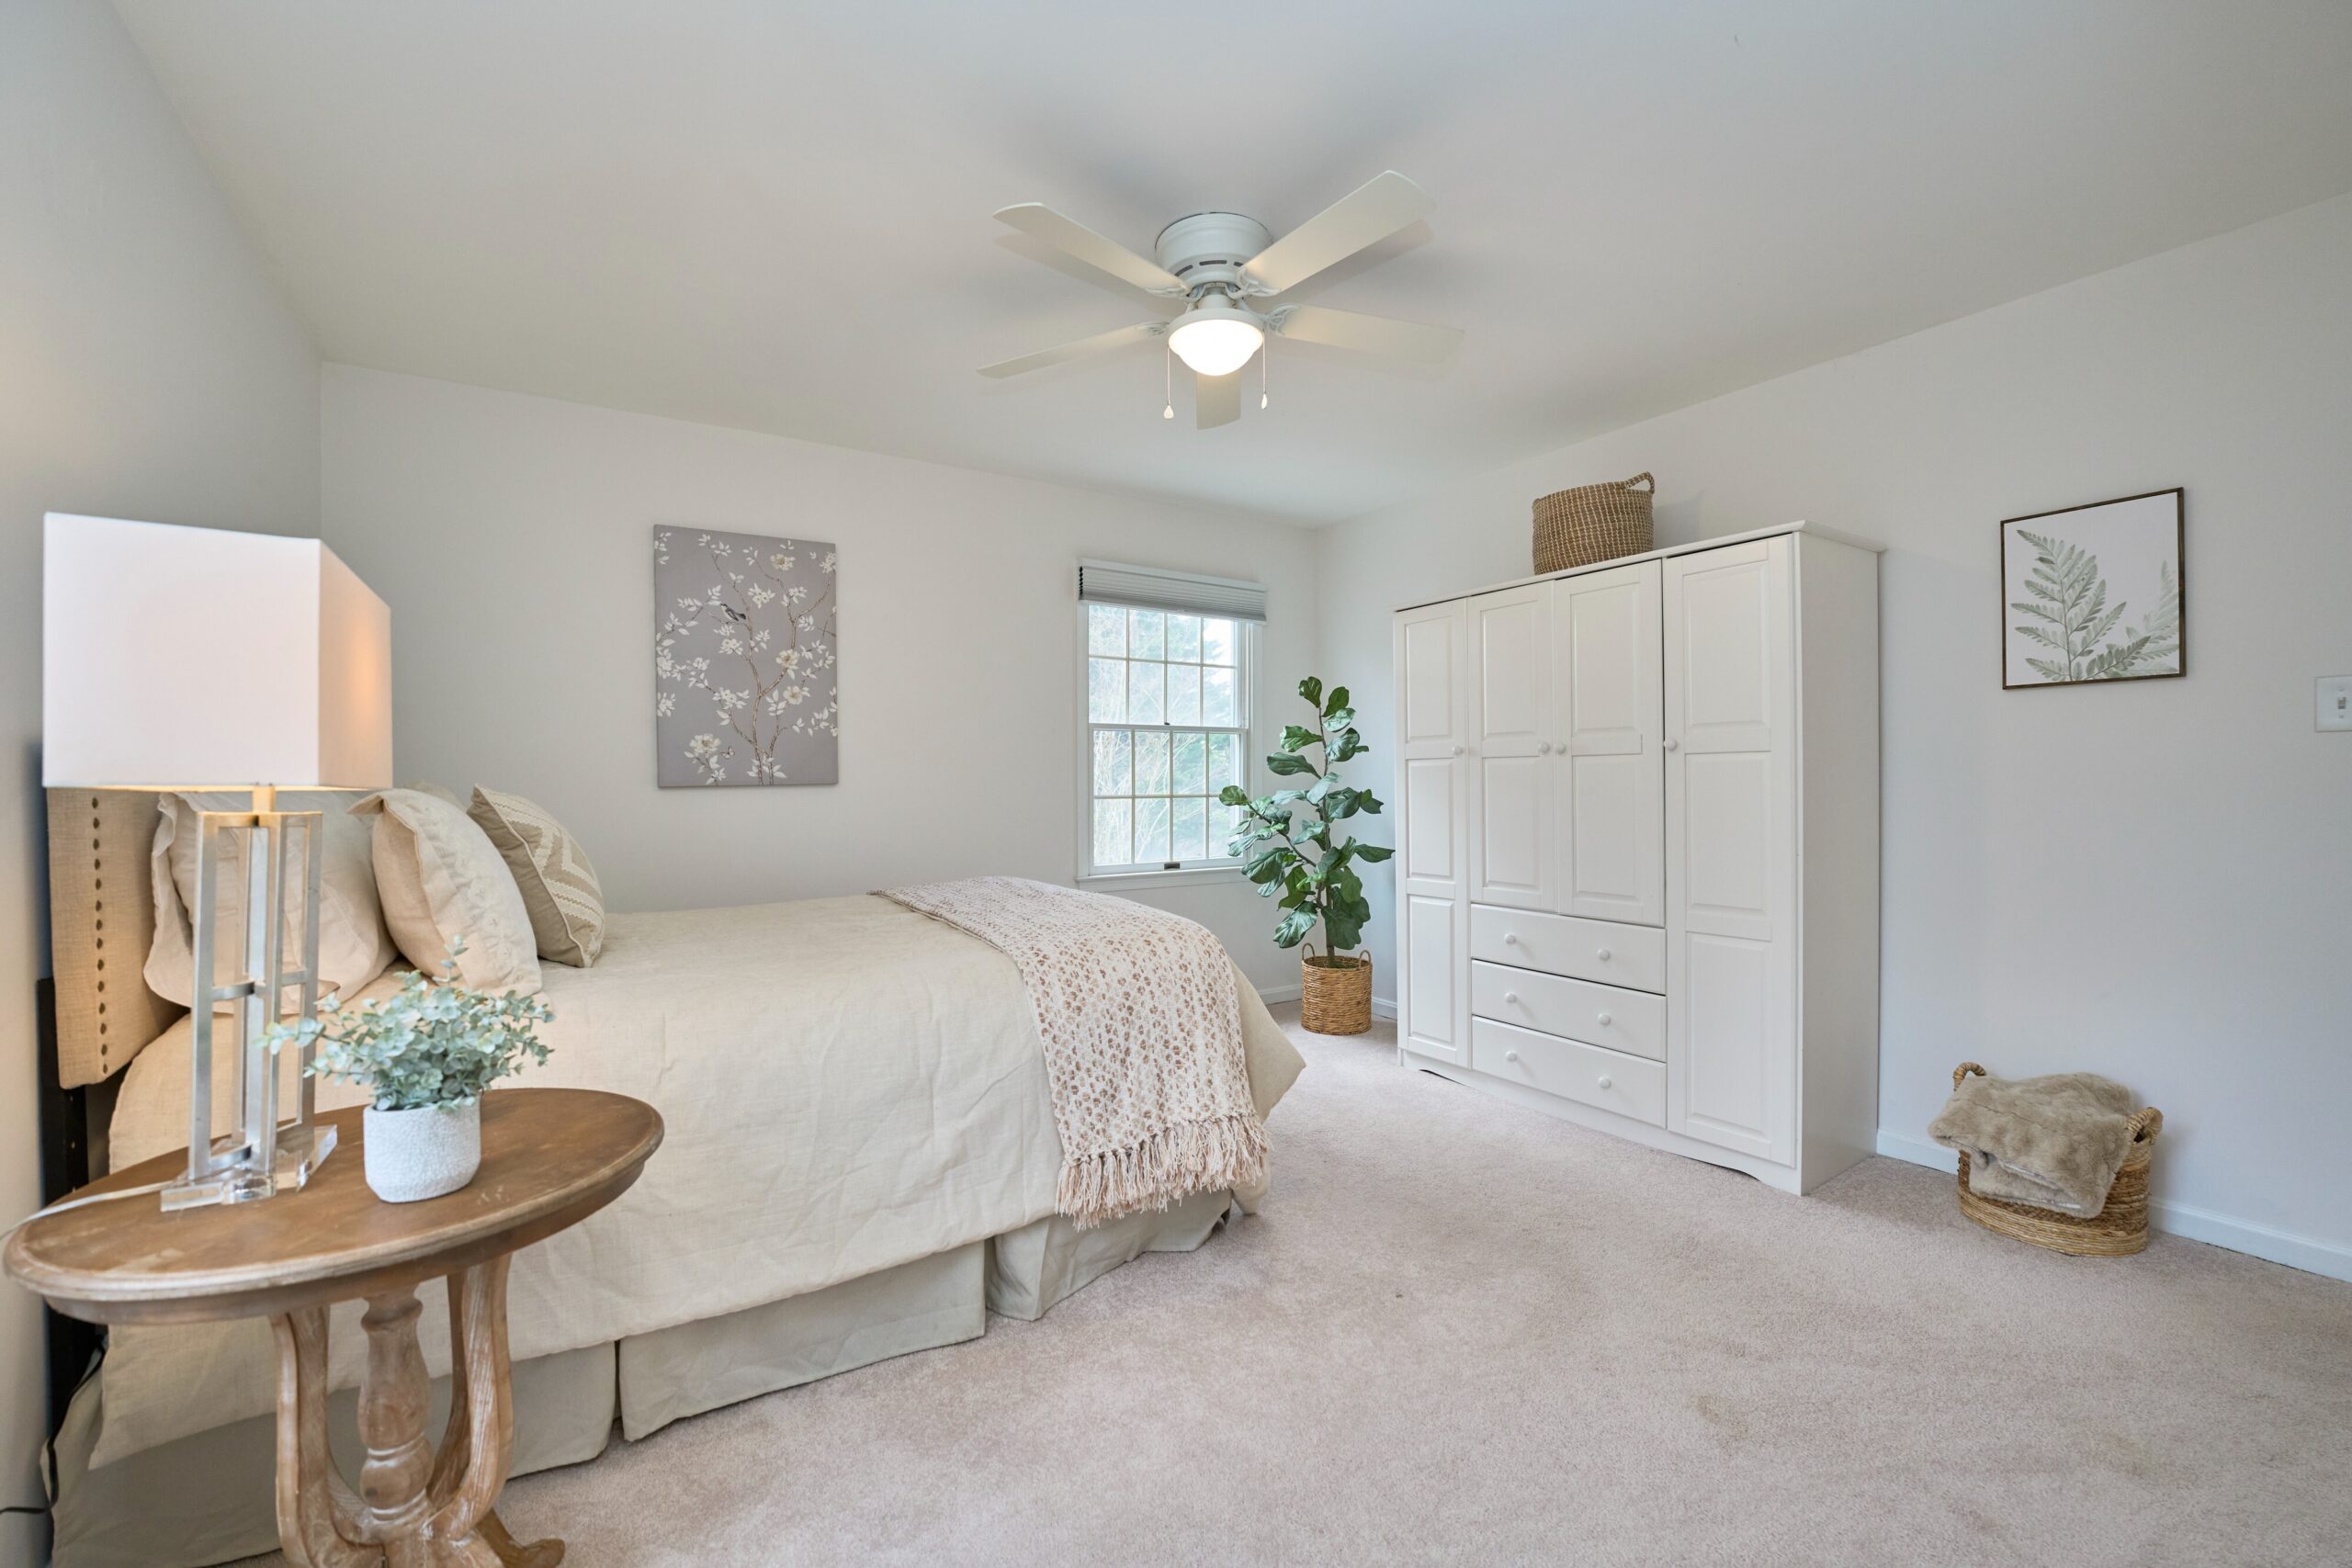 Professional interior photo of 3103 Indian Run Rd - showing the primary bedroom with white walls, white ceiling fan and plus new carpet